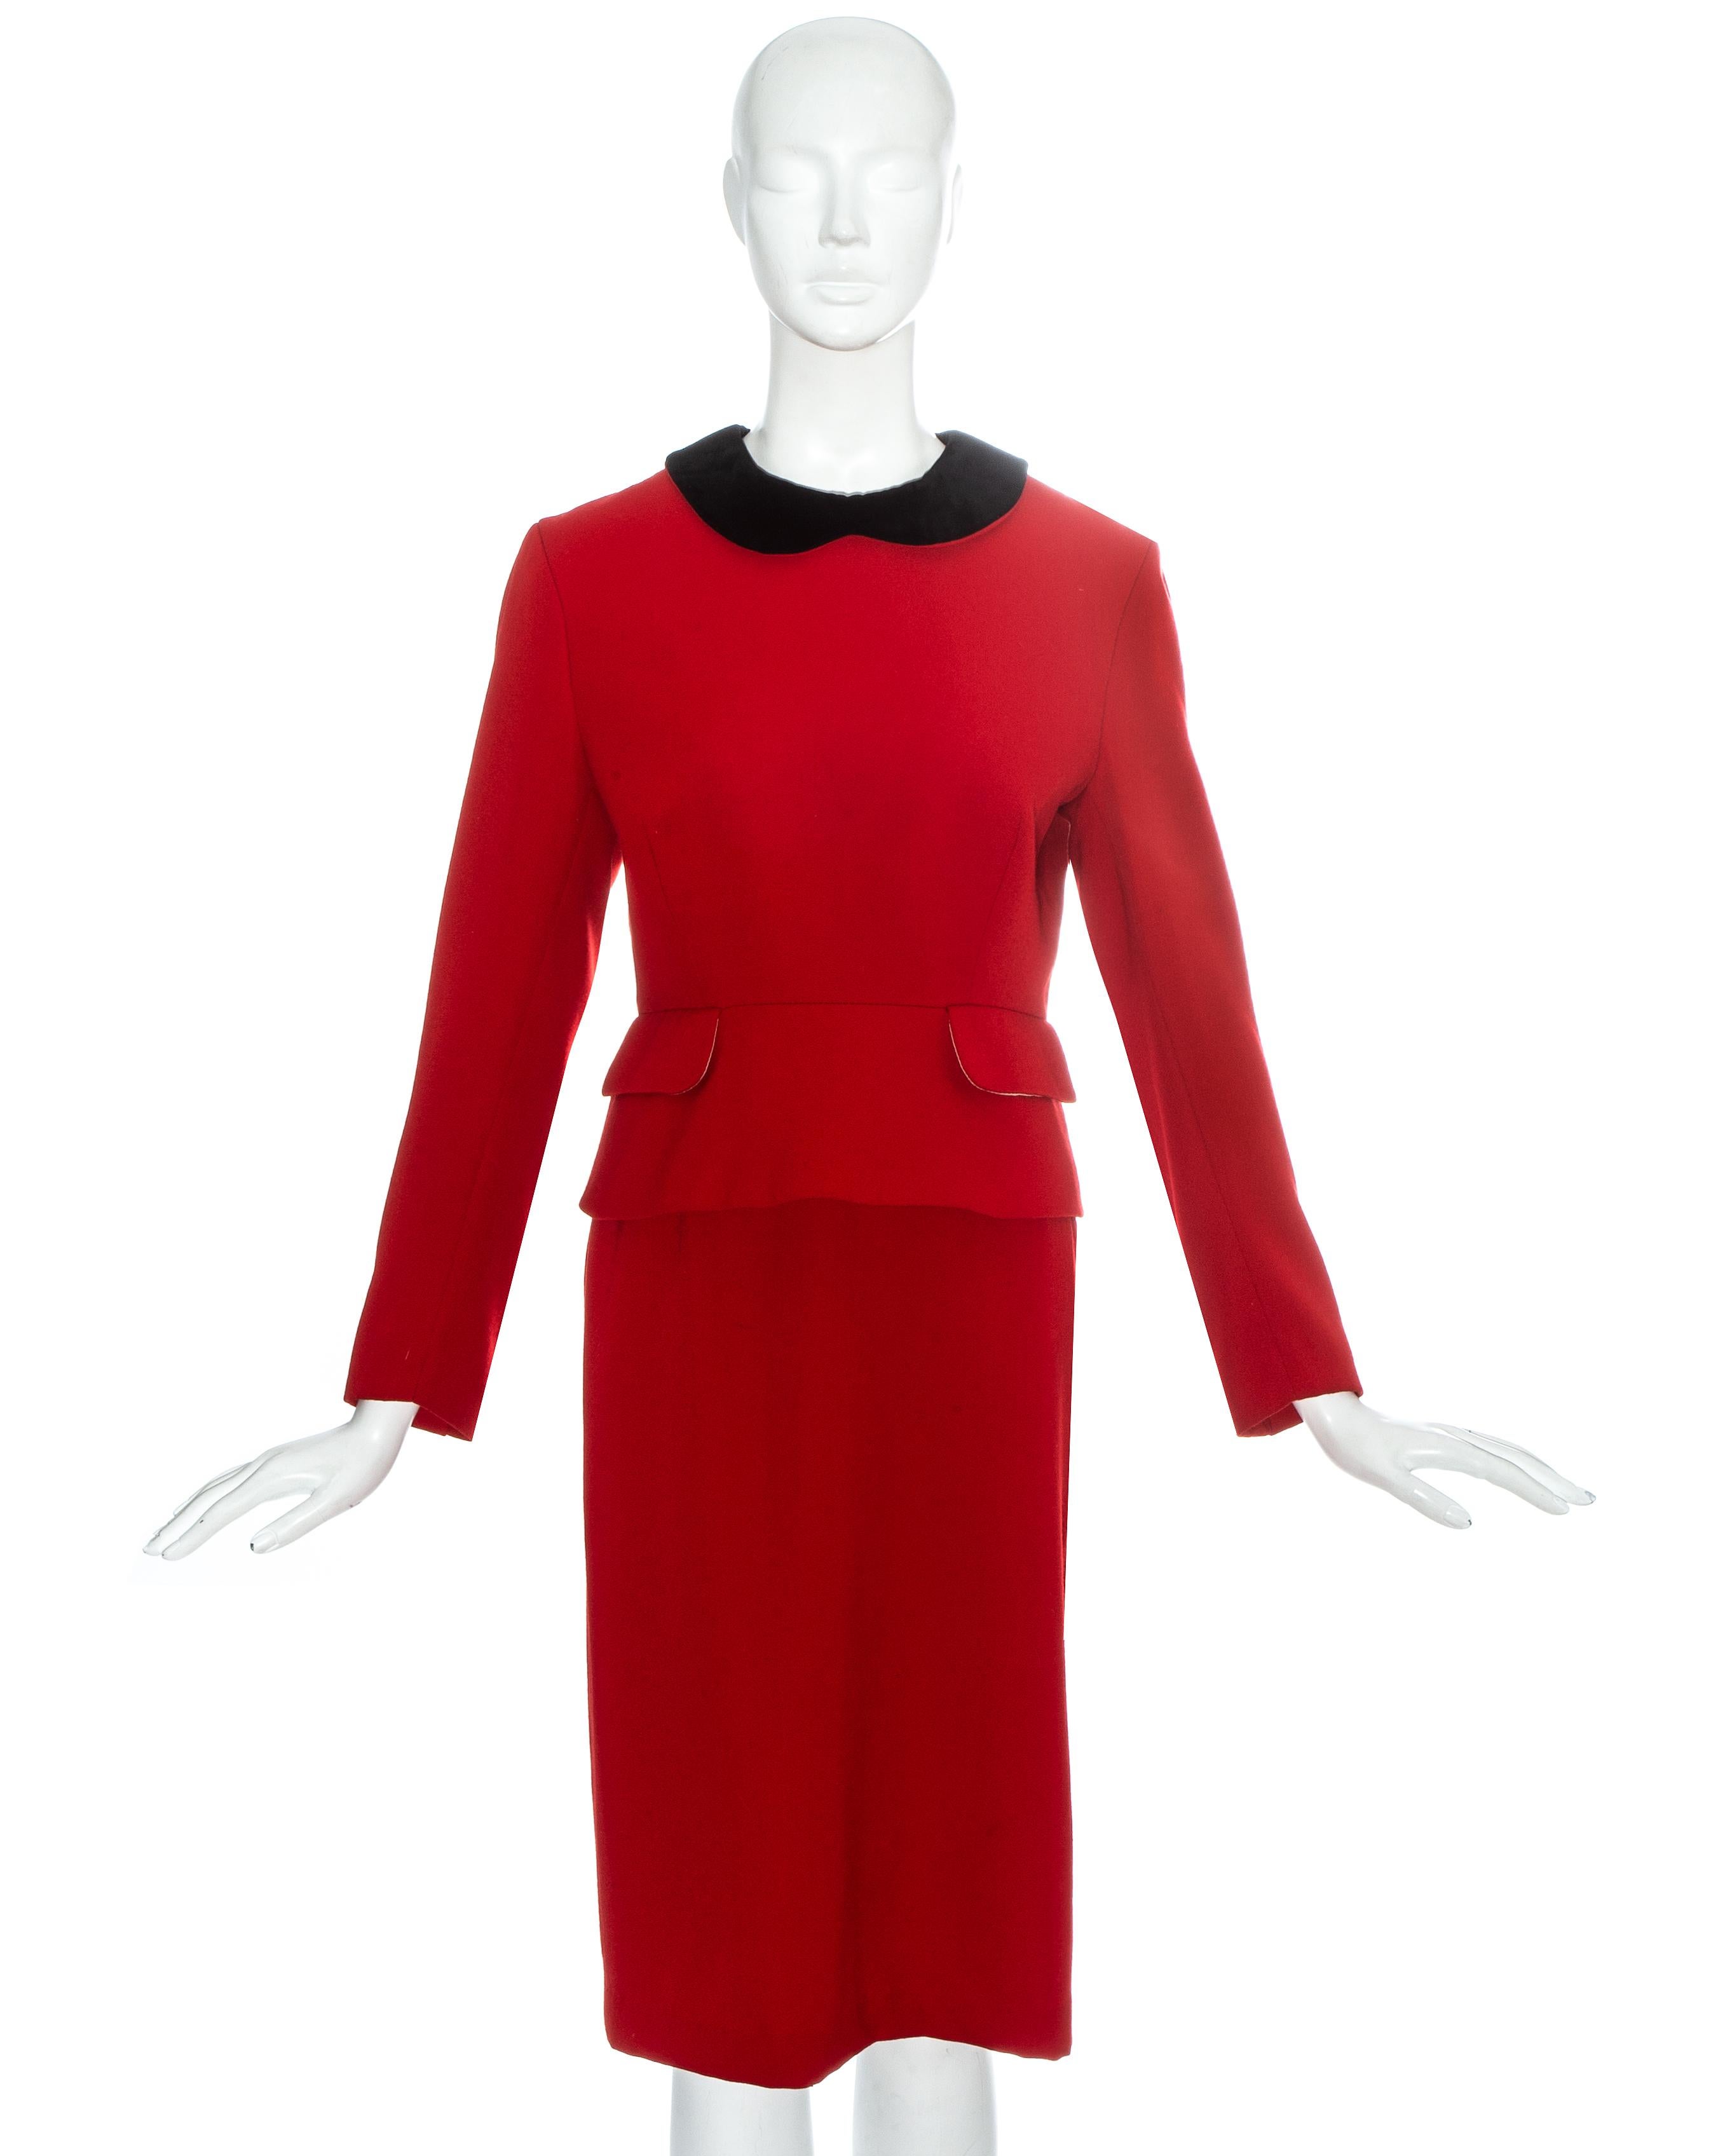 Vivienne Westwood red wool back-to-front skirt suit with gold fox engraved button fastenings at the centre back opening and black velvet Peter Pan collar.

Vivienne Westwood was photographed wearing this suit at various public events in 1991-1992,